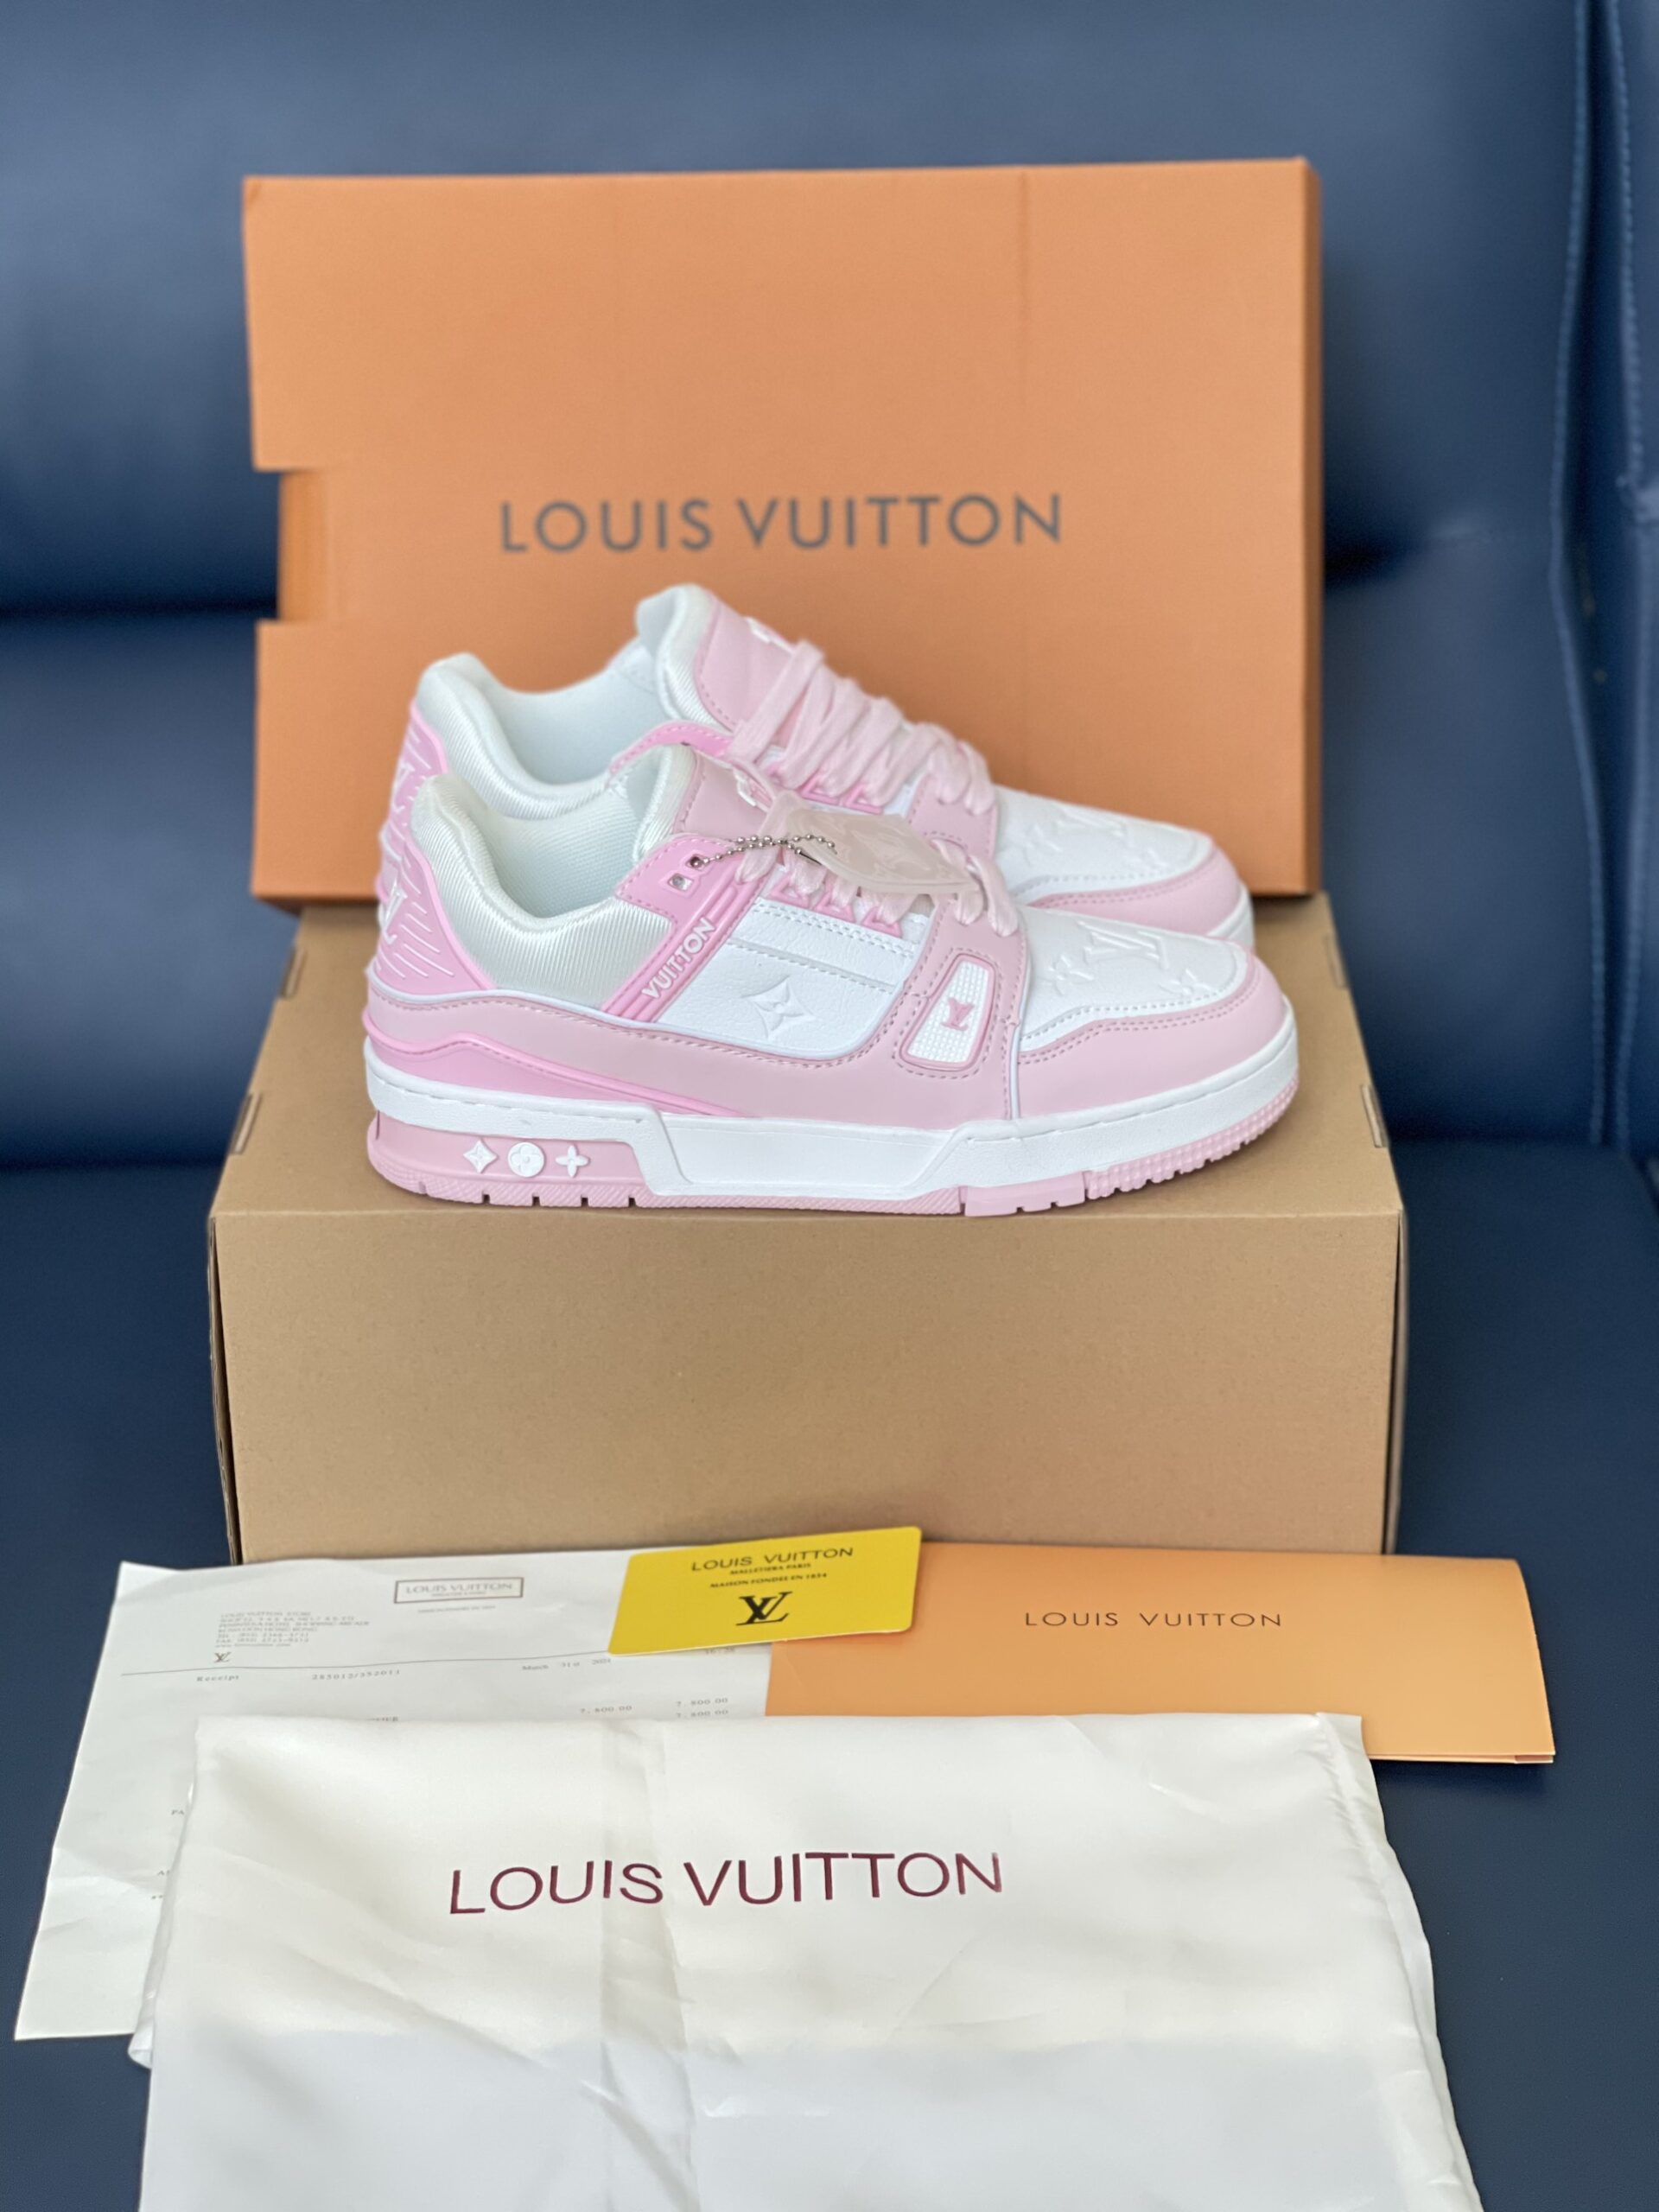 Giày Louis Vuitton LV Trainer Hồng Pink Rep 1:1